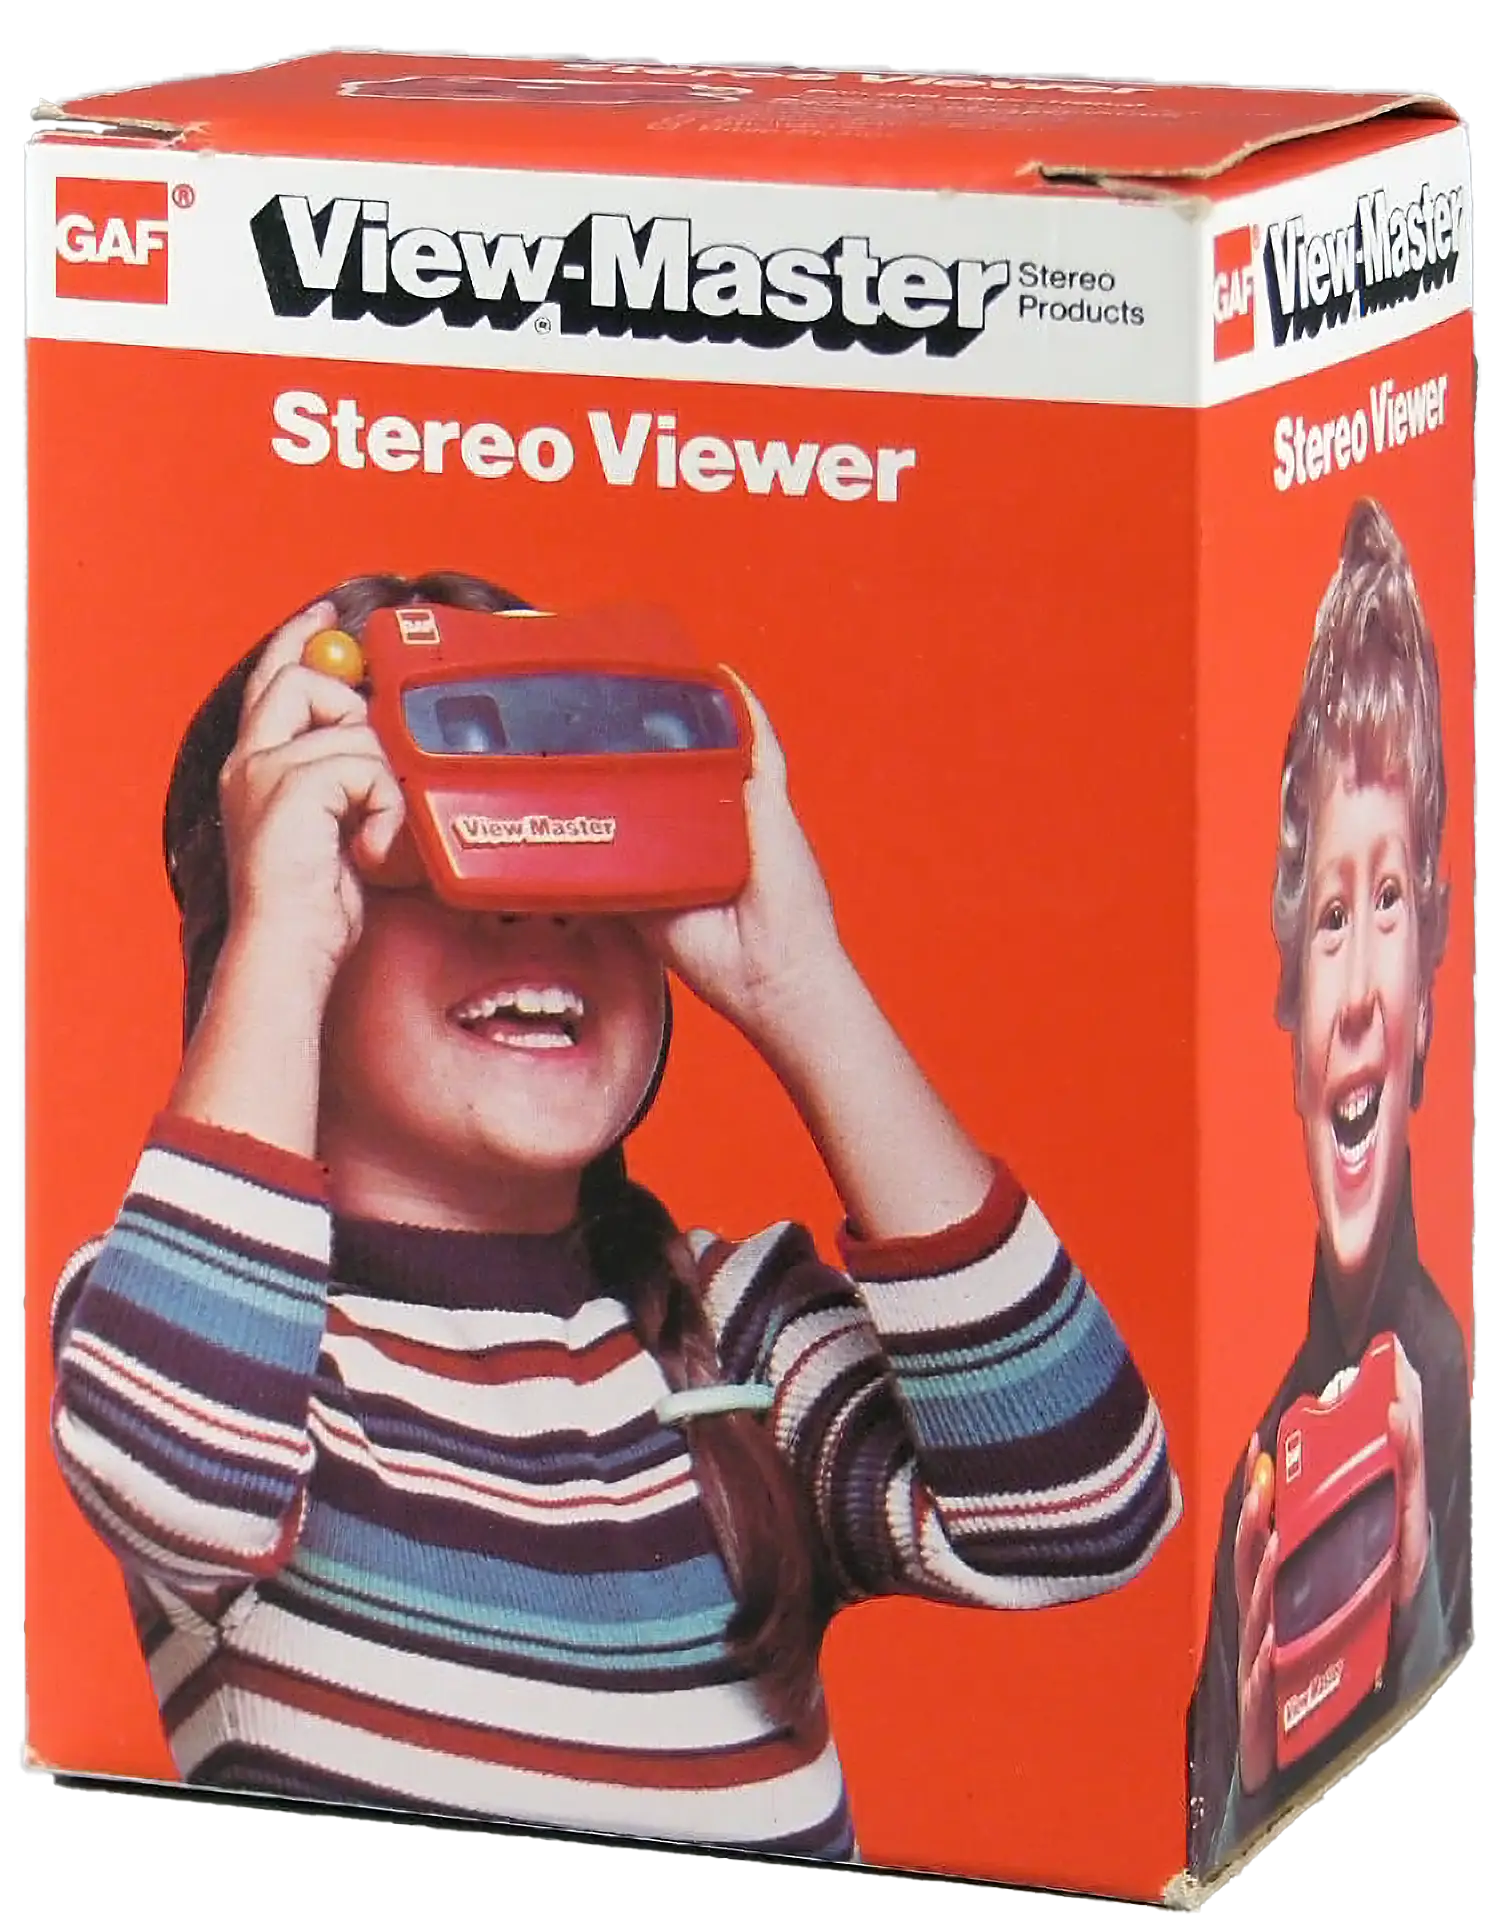 A box for the View-Master stereo viewer today, on which is a smiling child looking through the plastic View-Master device.